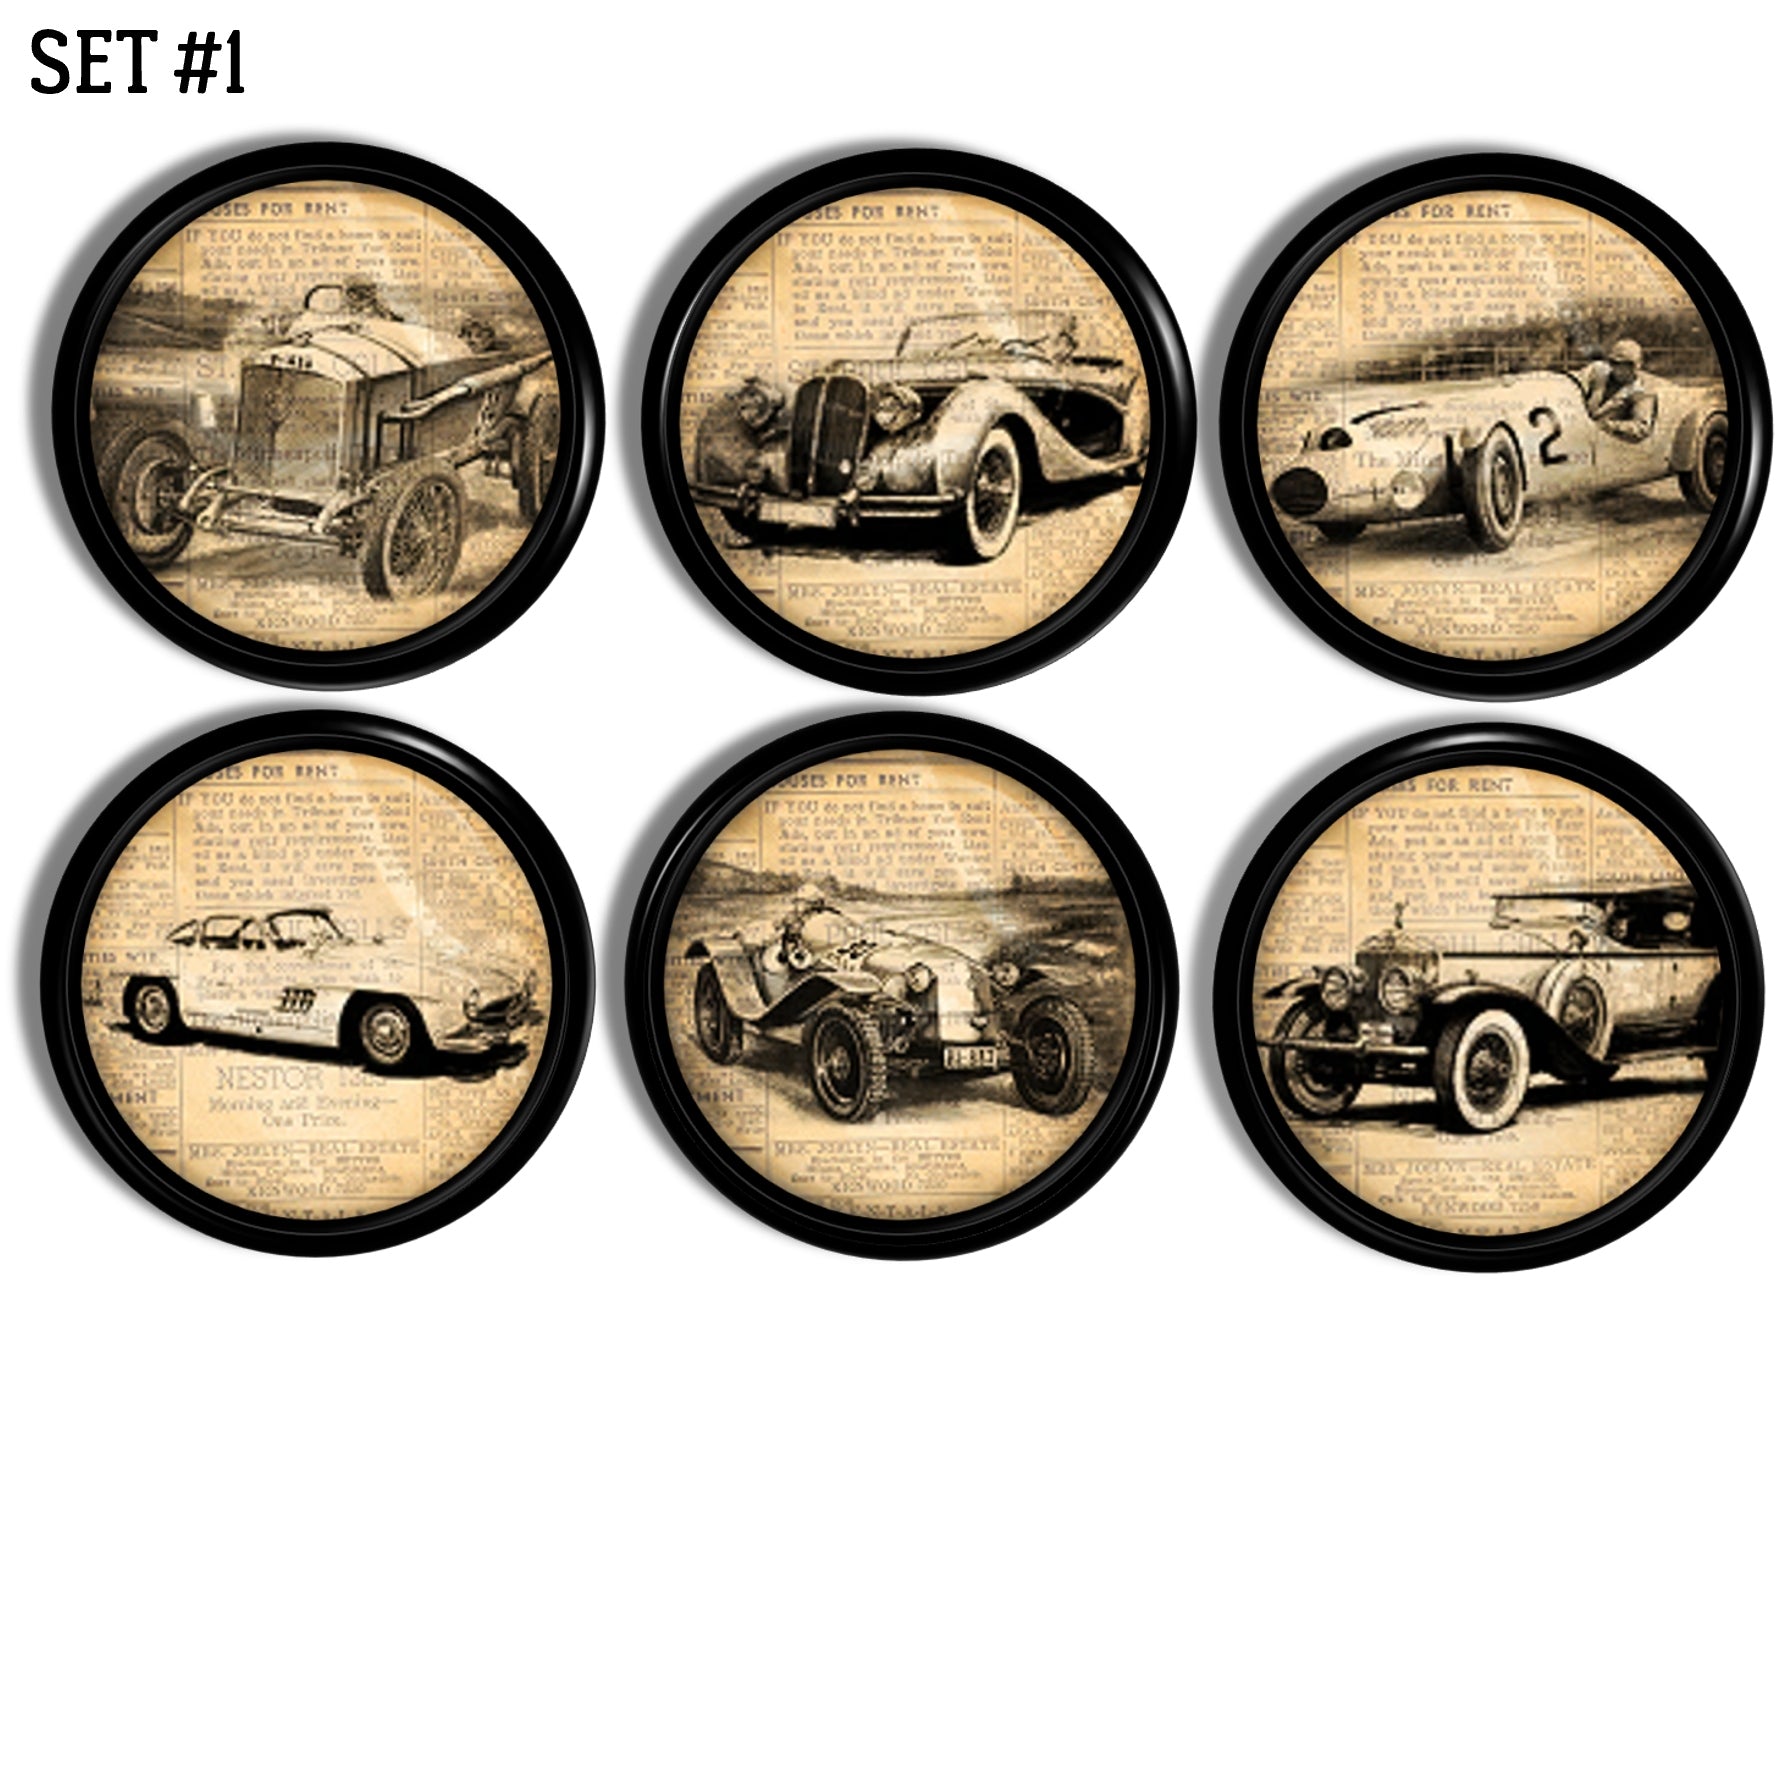 Handmade dresser pulls with antique cars in black on an aged newsprint background. Vintage mancave cabinet and drawer storage and organization hardware.